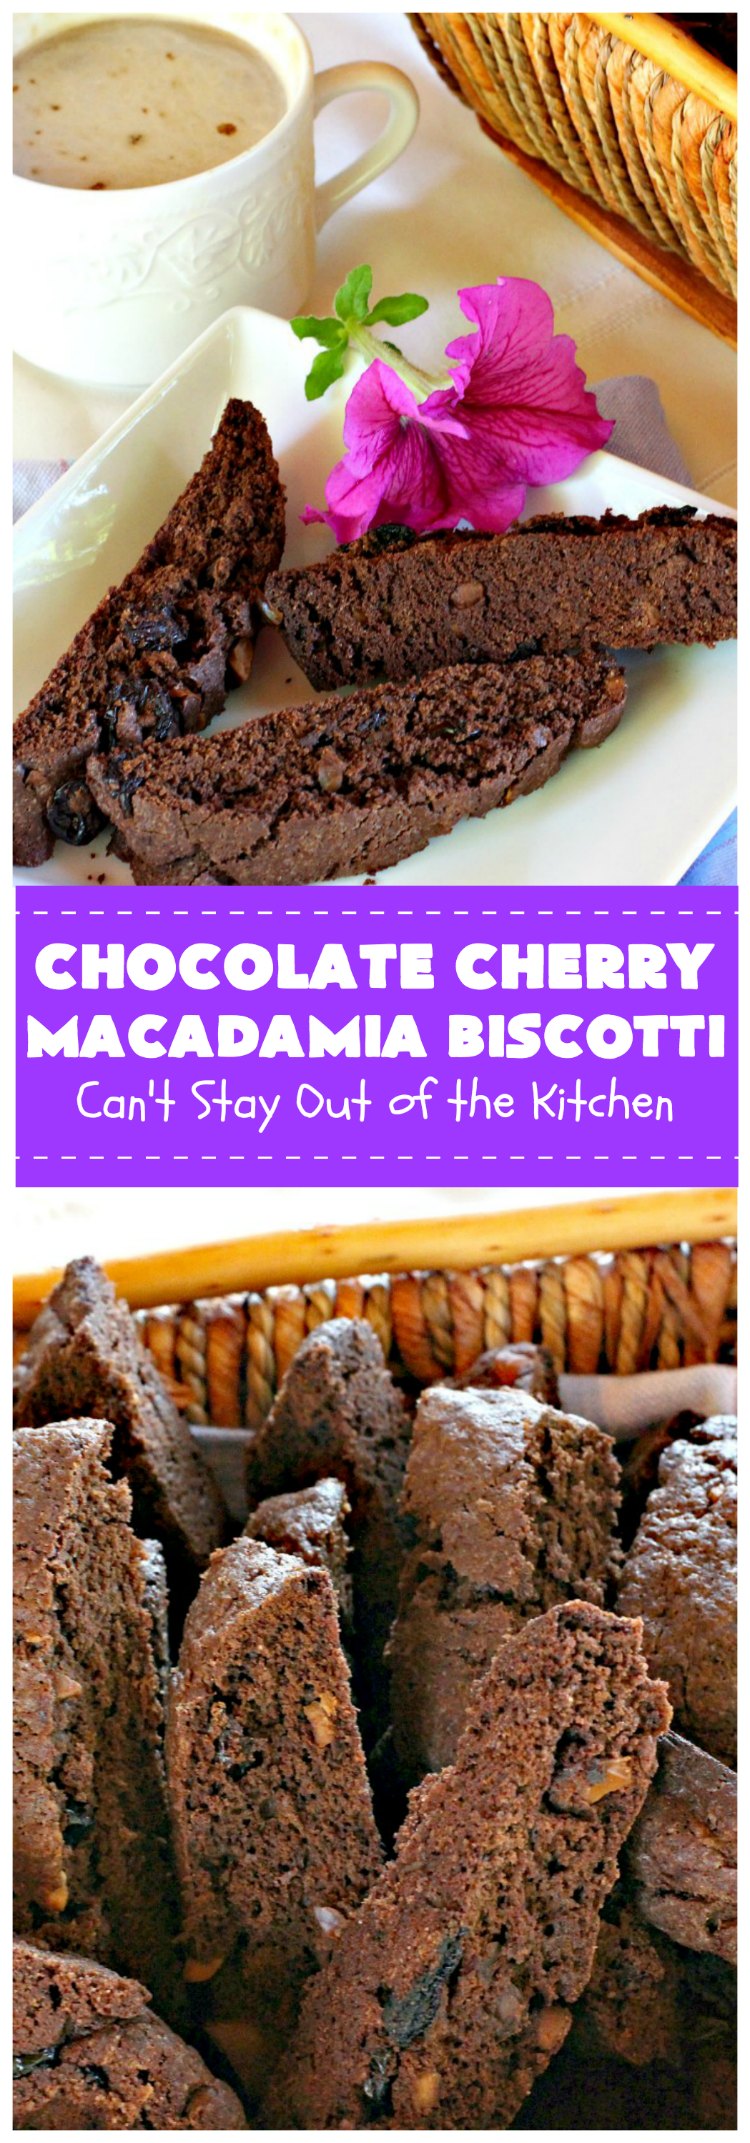 Chocolate Cherry Macadamia Biscotti | Can't Stay Out of the Kitchen